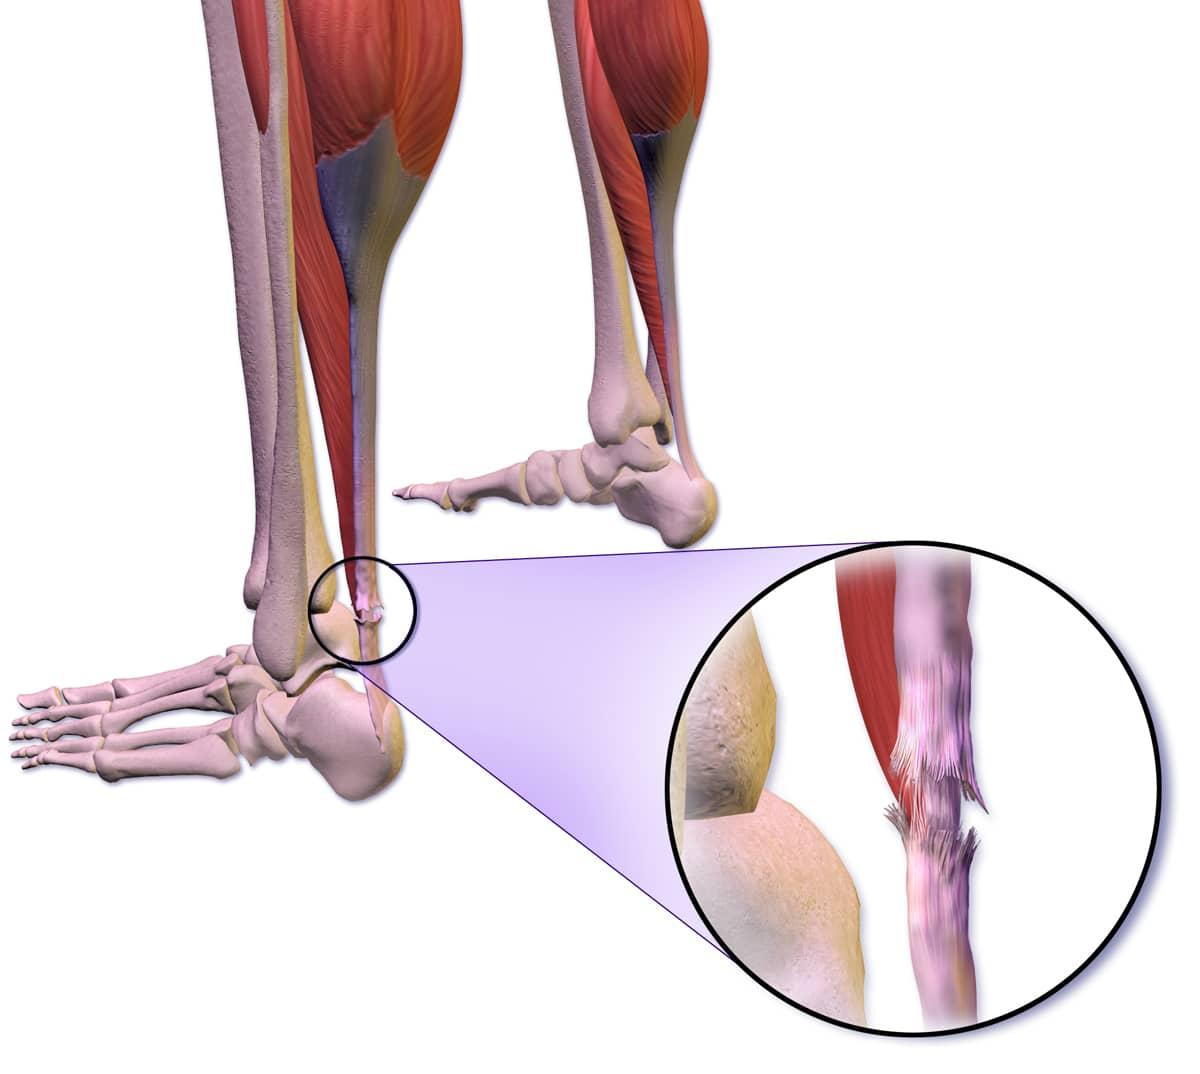 Anatomy of the Achilles Tendon causing pain.